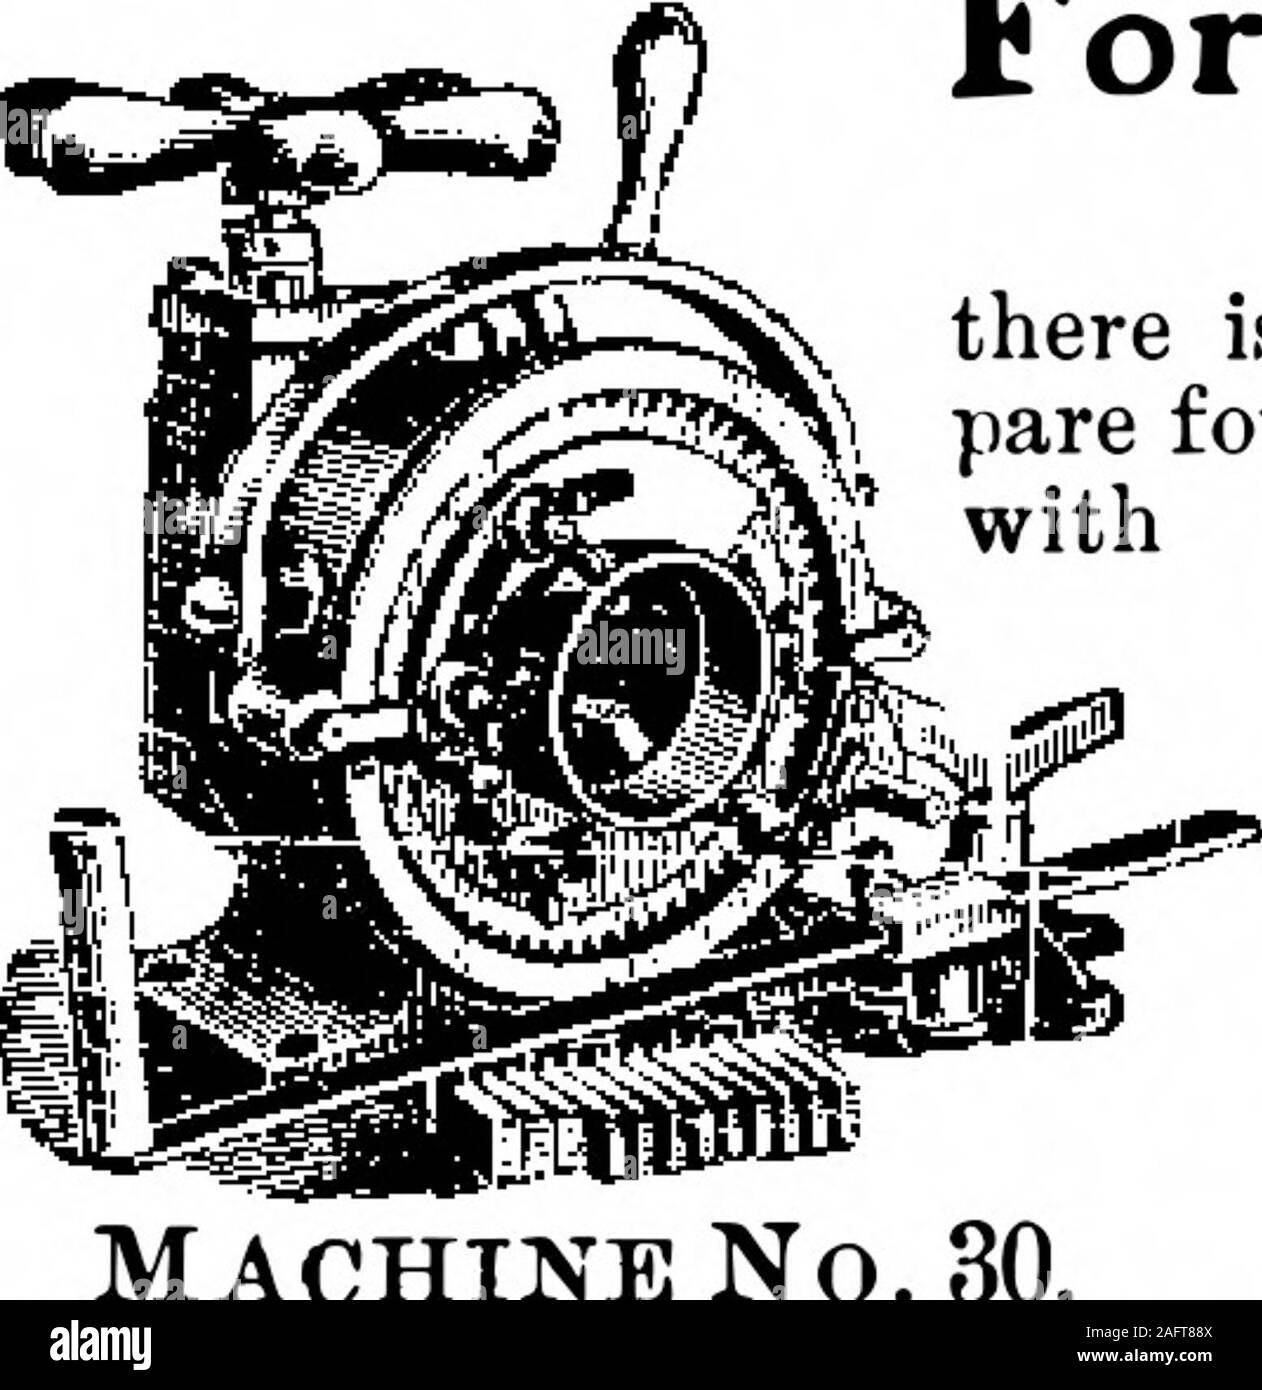 . Scientific American Volume 91 Number 09 (August 1904). For Pleasure Business Economy Style Our Double-Cylinder Machine holds atl worlds records. Motors and accessories sold separately. Send for catalog G. H. CURTISS MFG. CO. - Hammondsport, N. Y. For. MACHINE No. 3.RangeK-2in.R.& L. PIPE-THREADINGor CUTTING there is no machine on the market that can com-pare for ease of operation and excellence of work FORBES PATENT DIE STOCK Vise is self-centering and dies are adjust-able to any variation of the fittings. Partscan be duplicated at slight cost when wornout. Will thread and cut up to 12 in. p Stock Photo